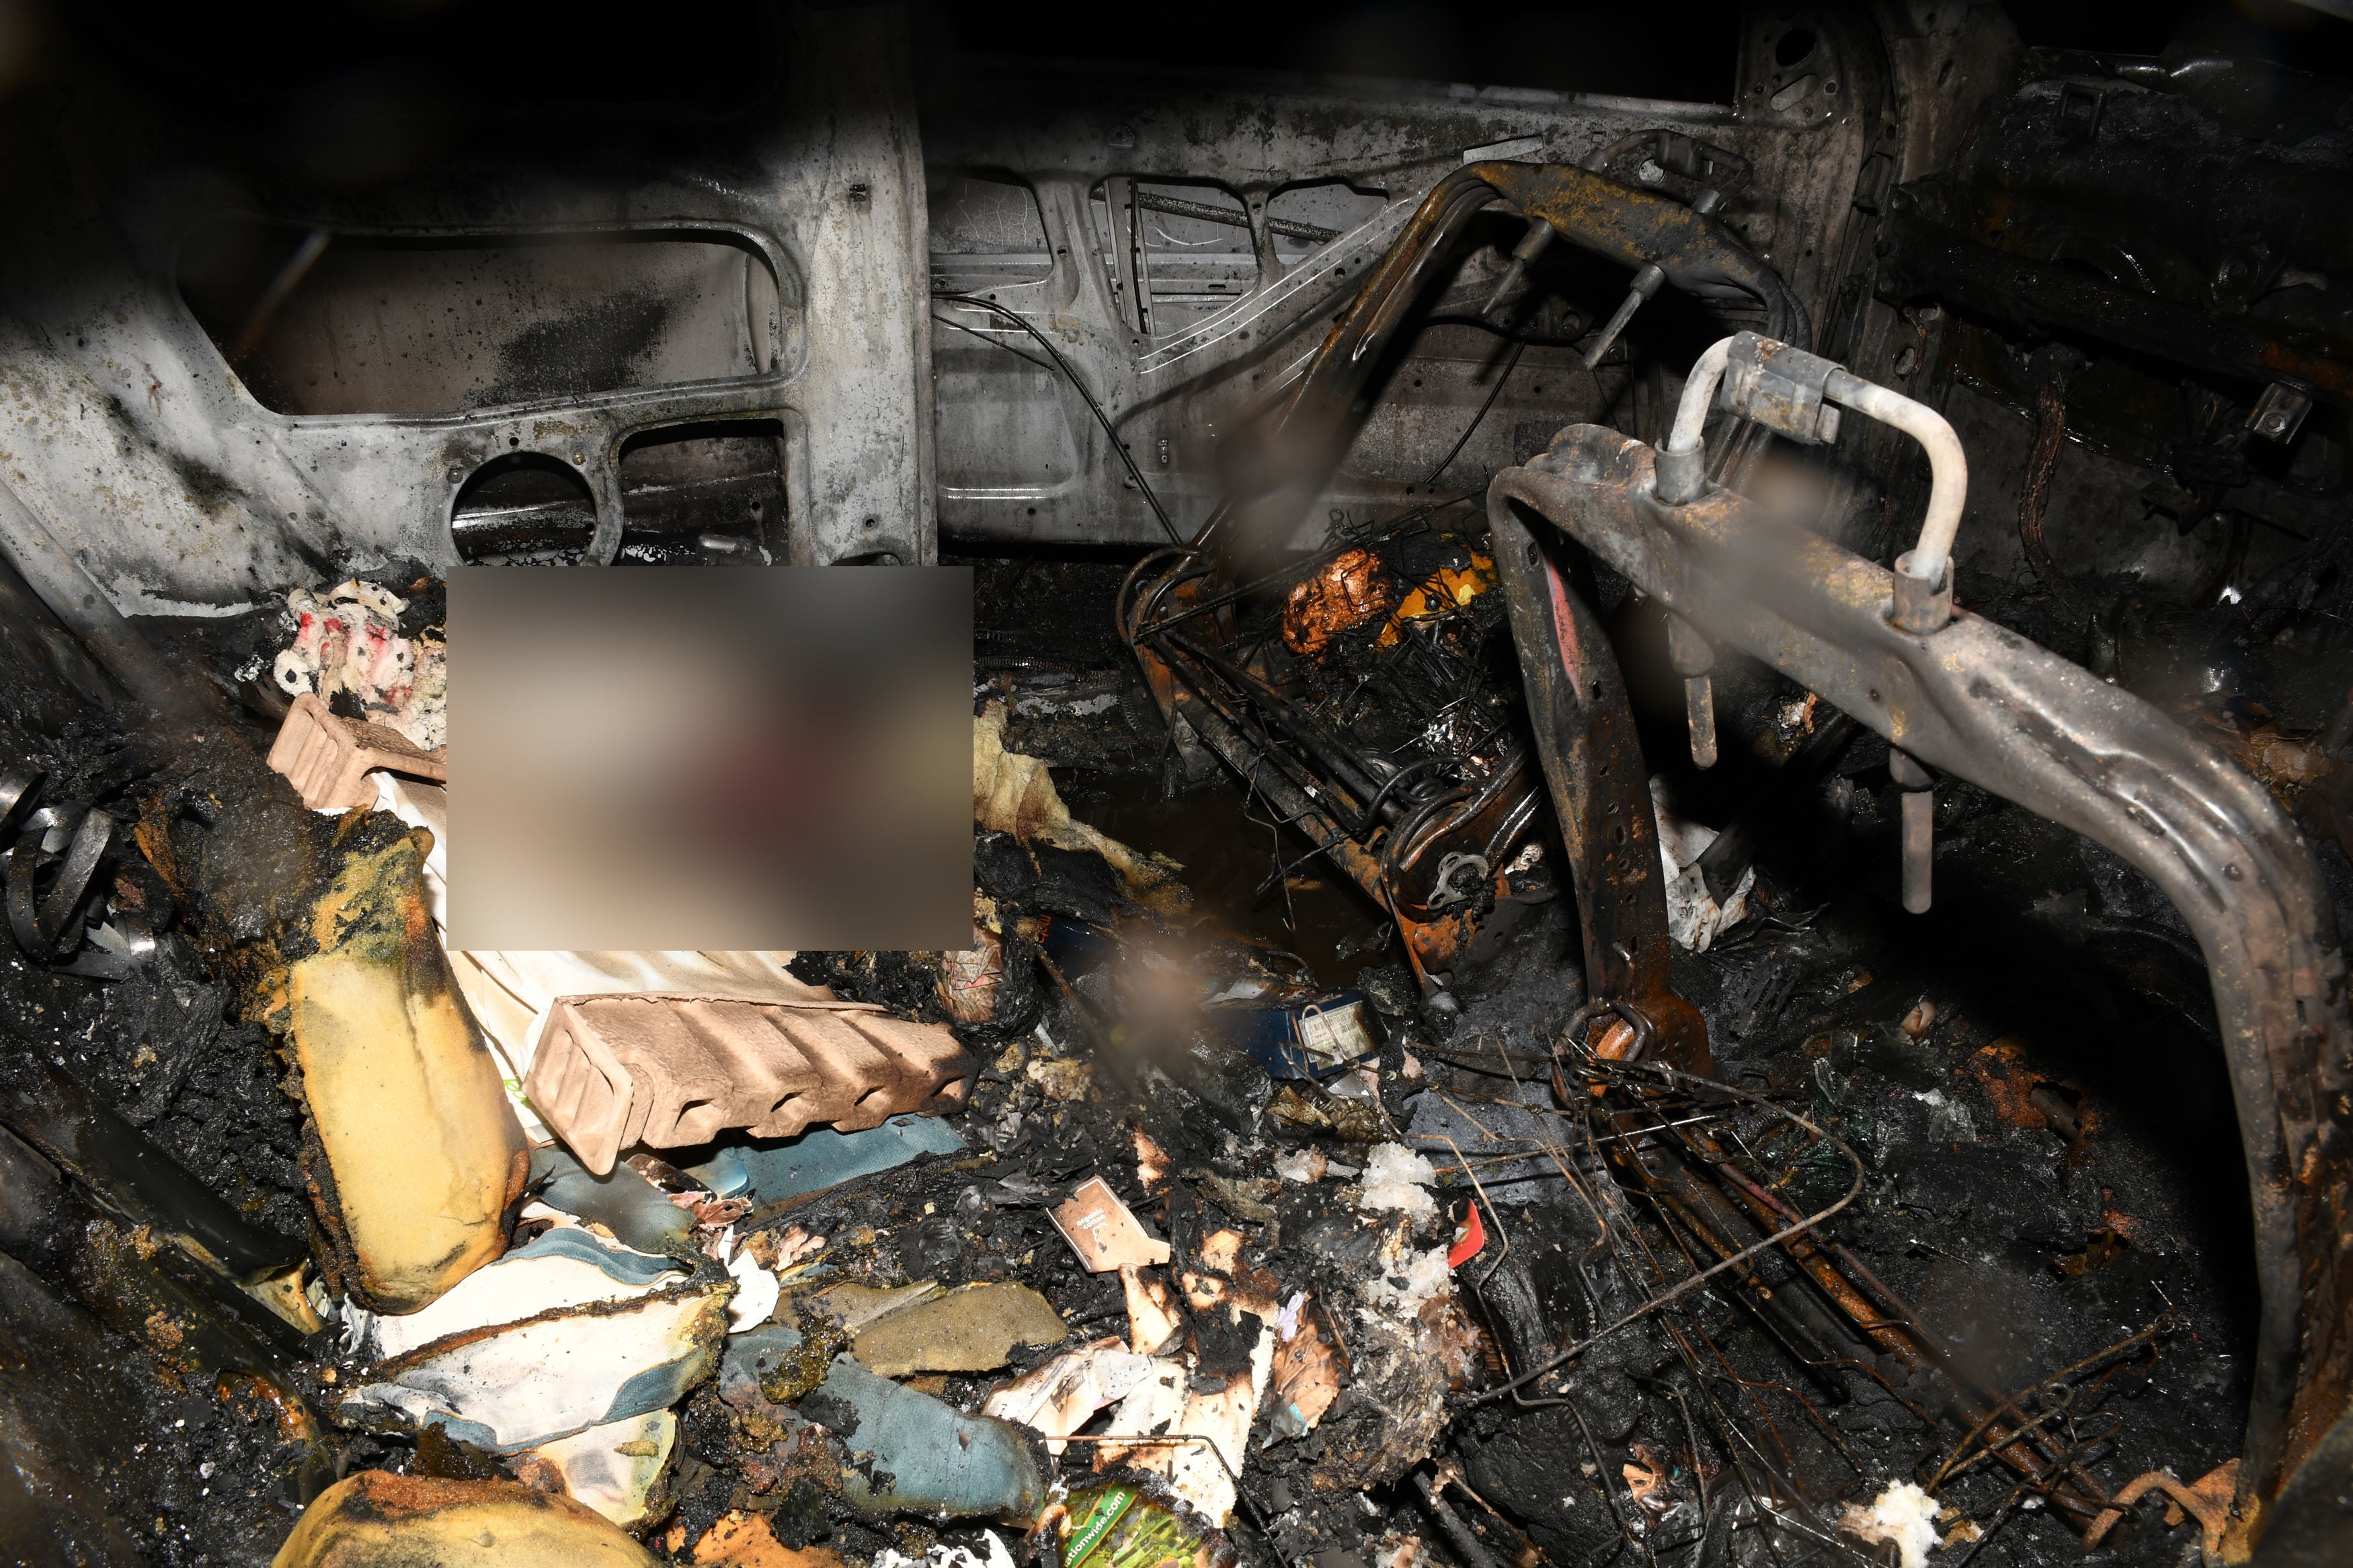 A placenta was among the charred objects found in the burnt out vehicle, the trial heard